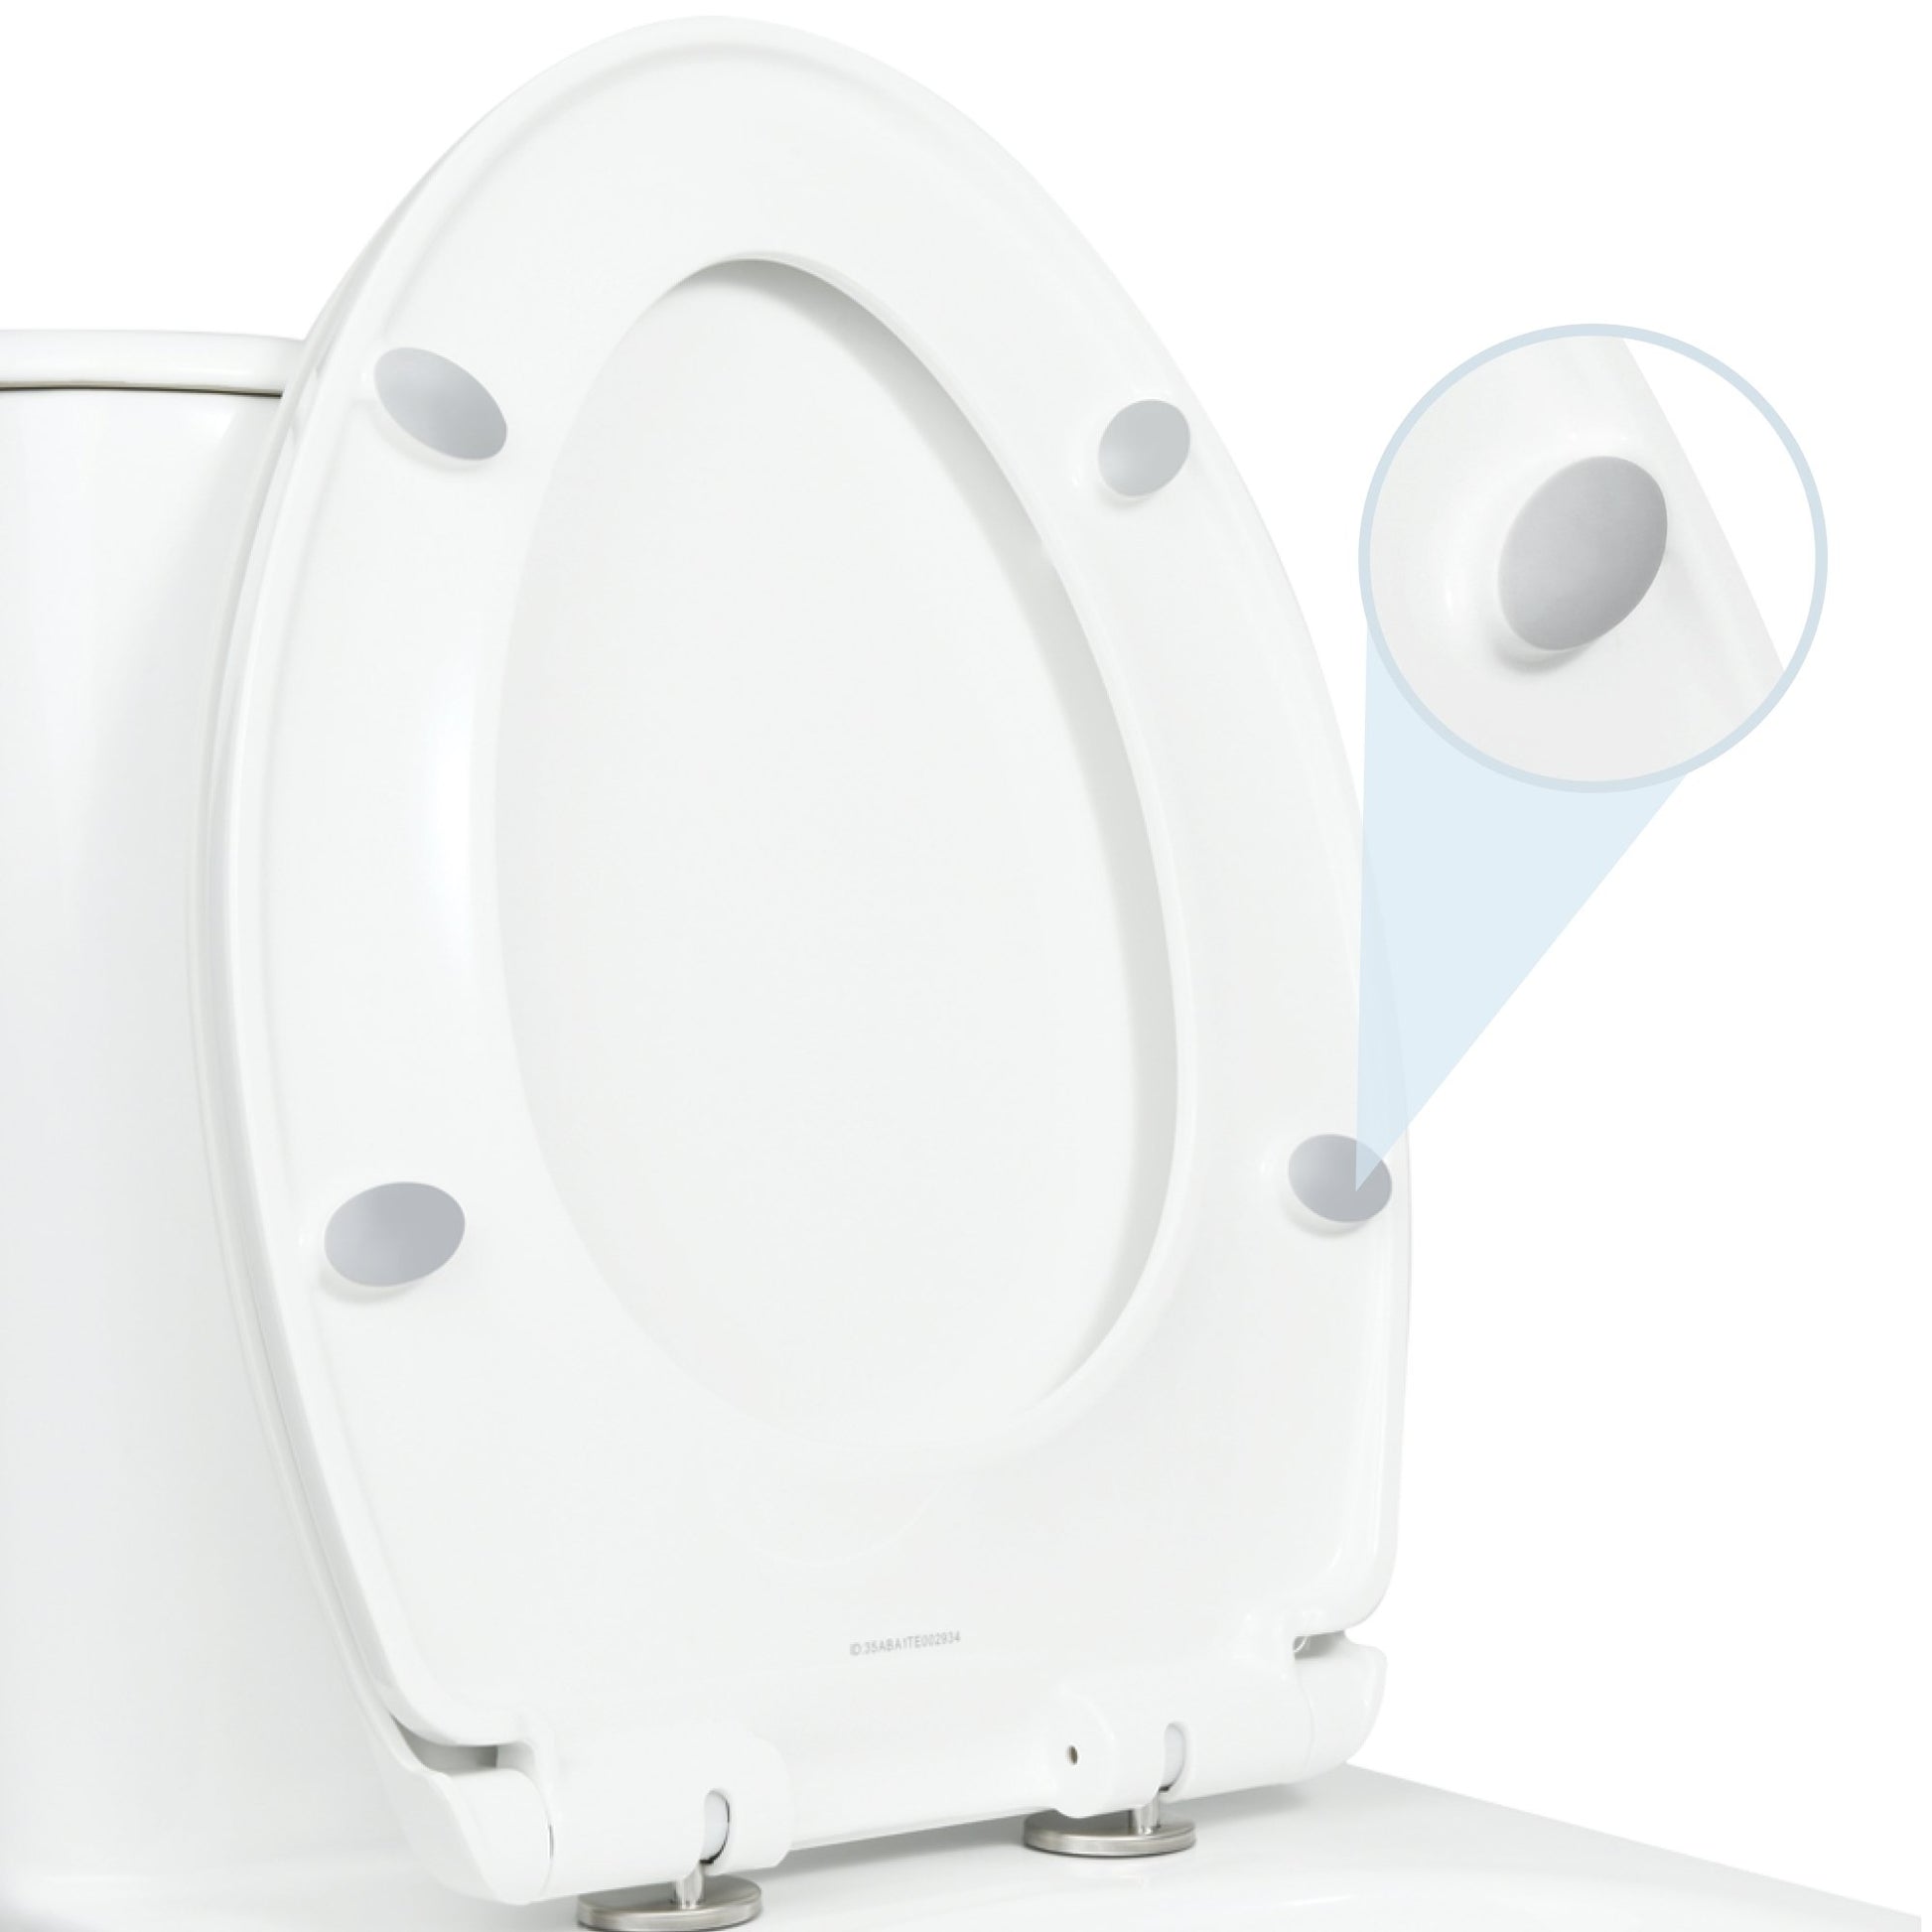 LUXE Comfort Fit Toilet Seat includes non-slip bumpers